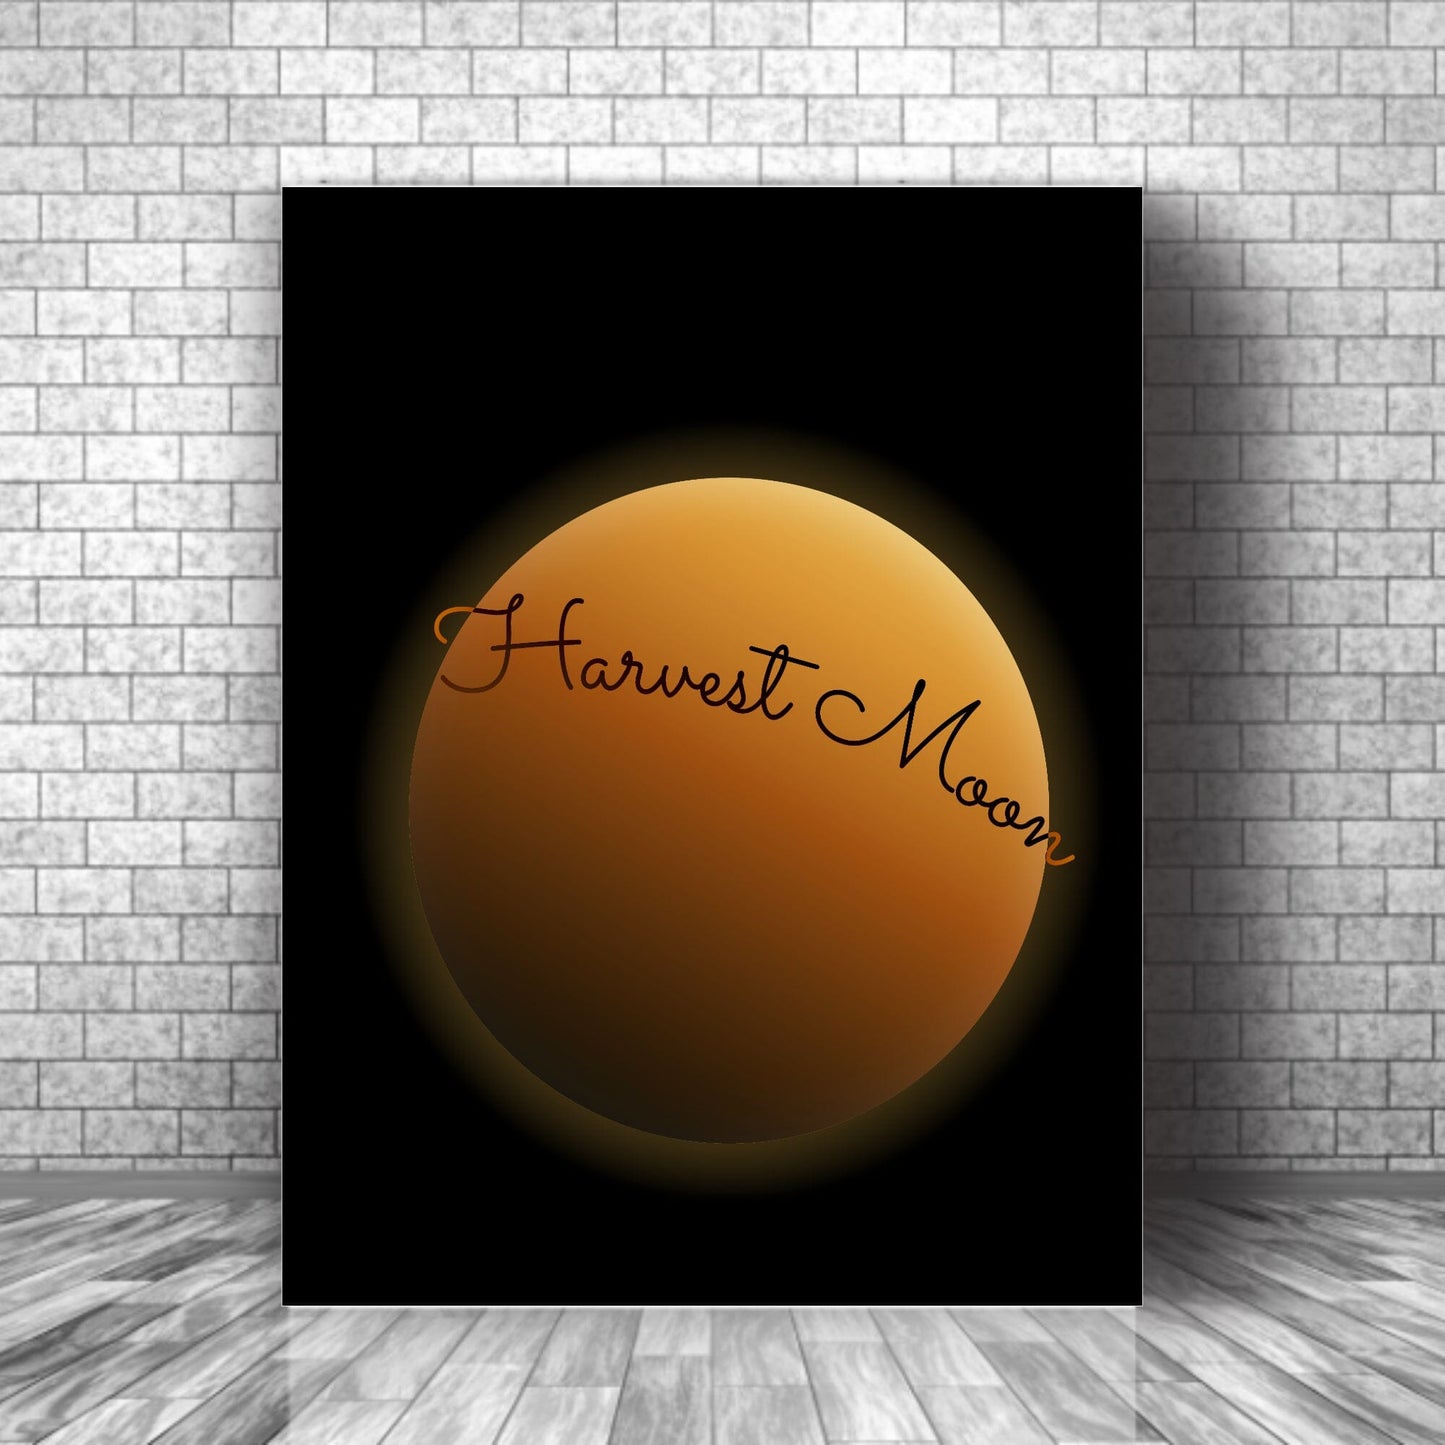 Harvest Moon by Neil Young - Music Song Lyric Print Artwork Song Lyrics Art Song Lyrics Art 11x14 Canvas Wrap 